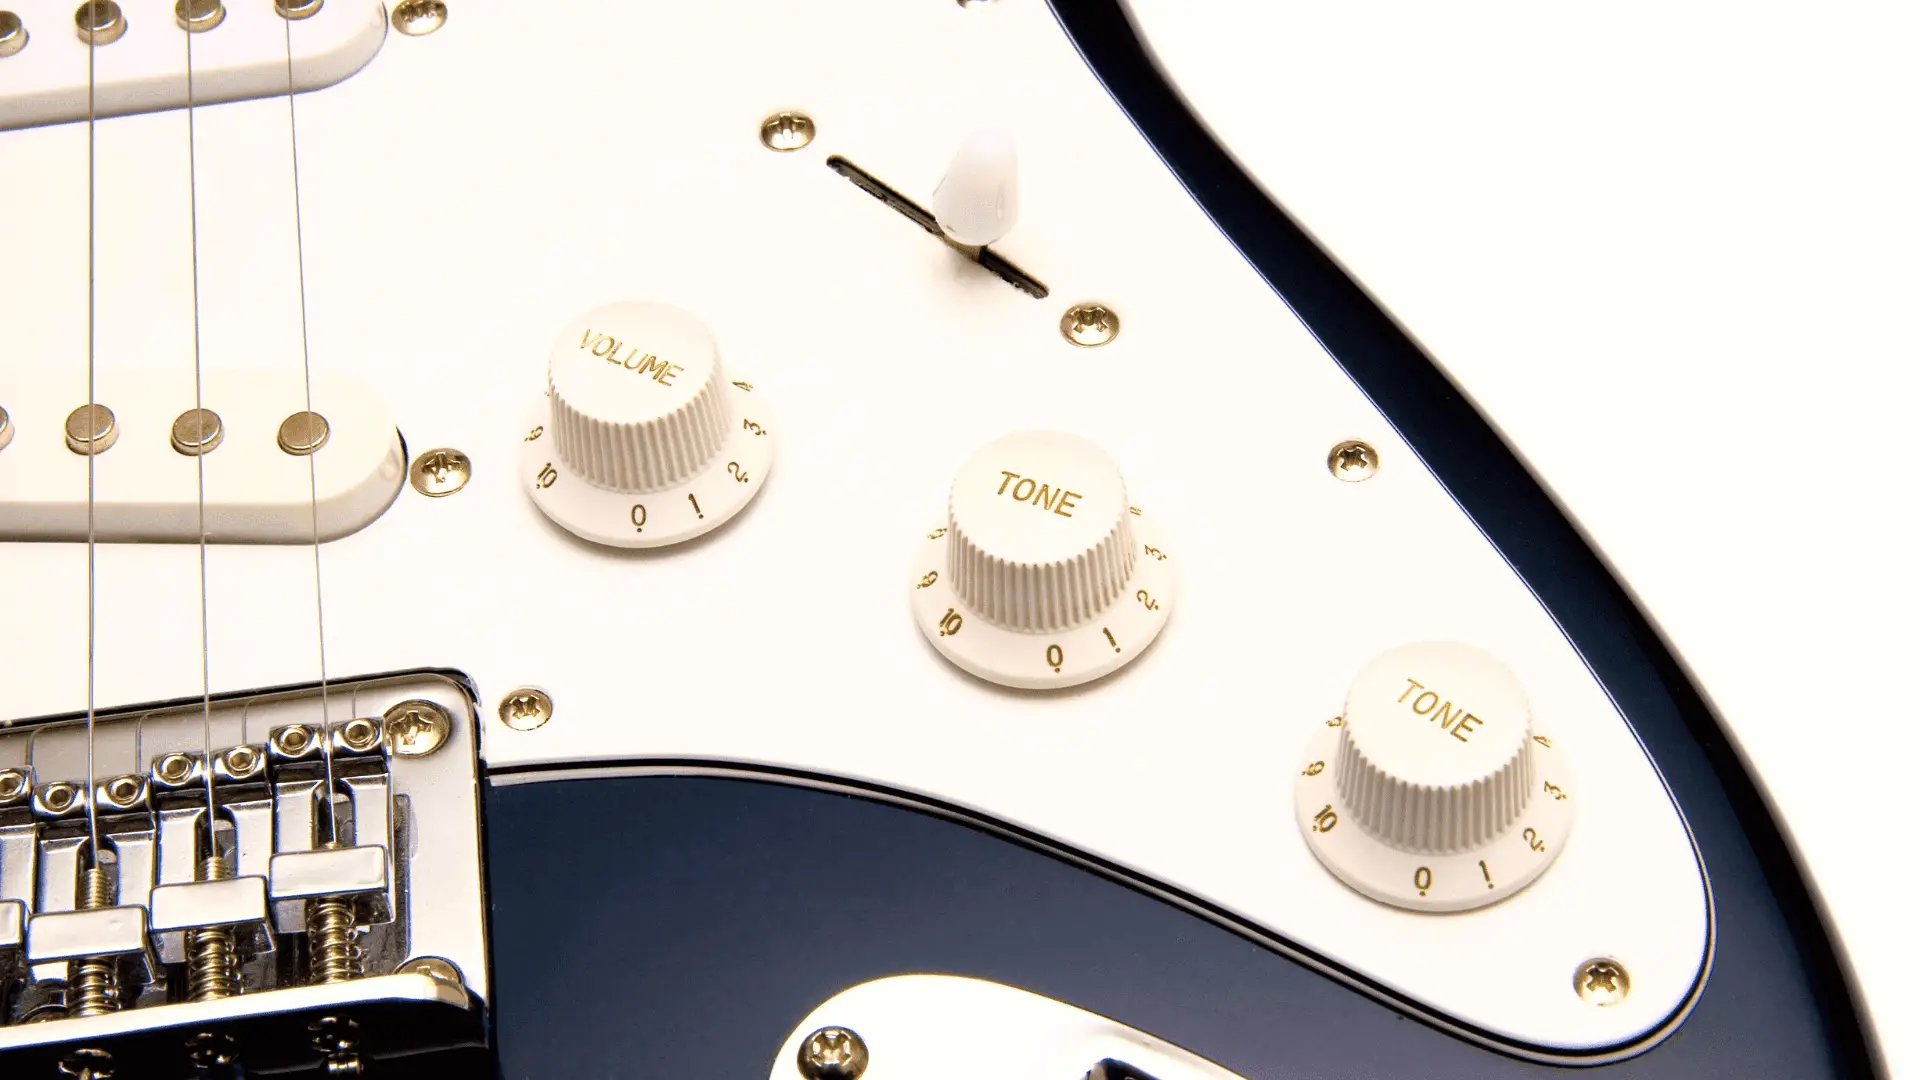 What are the knobs and switches on a guitar for? Control your instrument